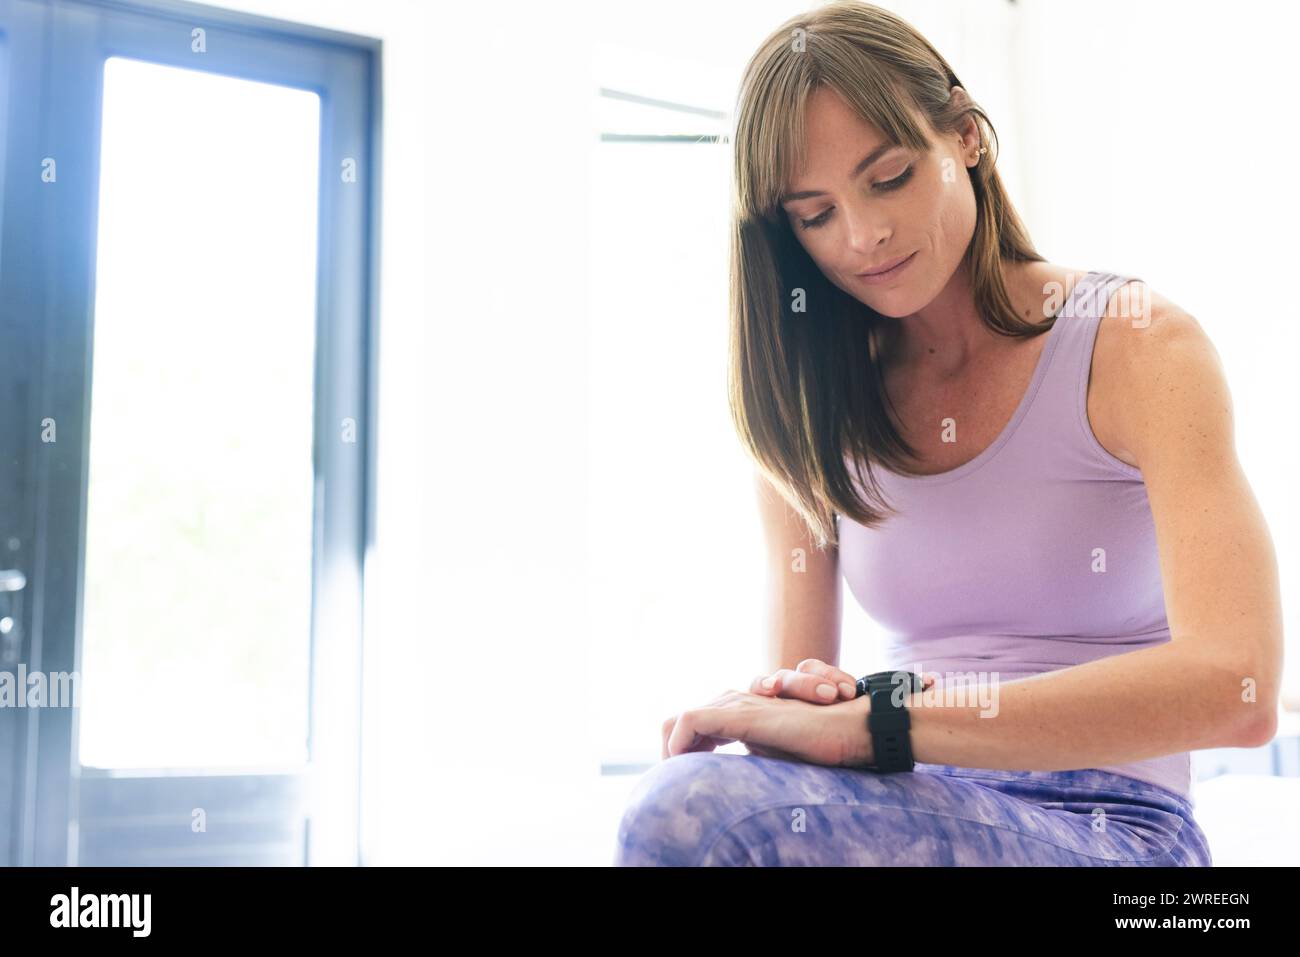 Caucasian woman with light brown hair checks her fitness tracker with copy space Stock Photo